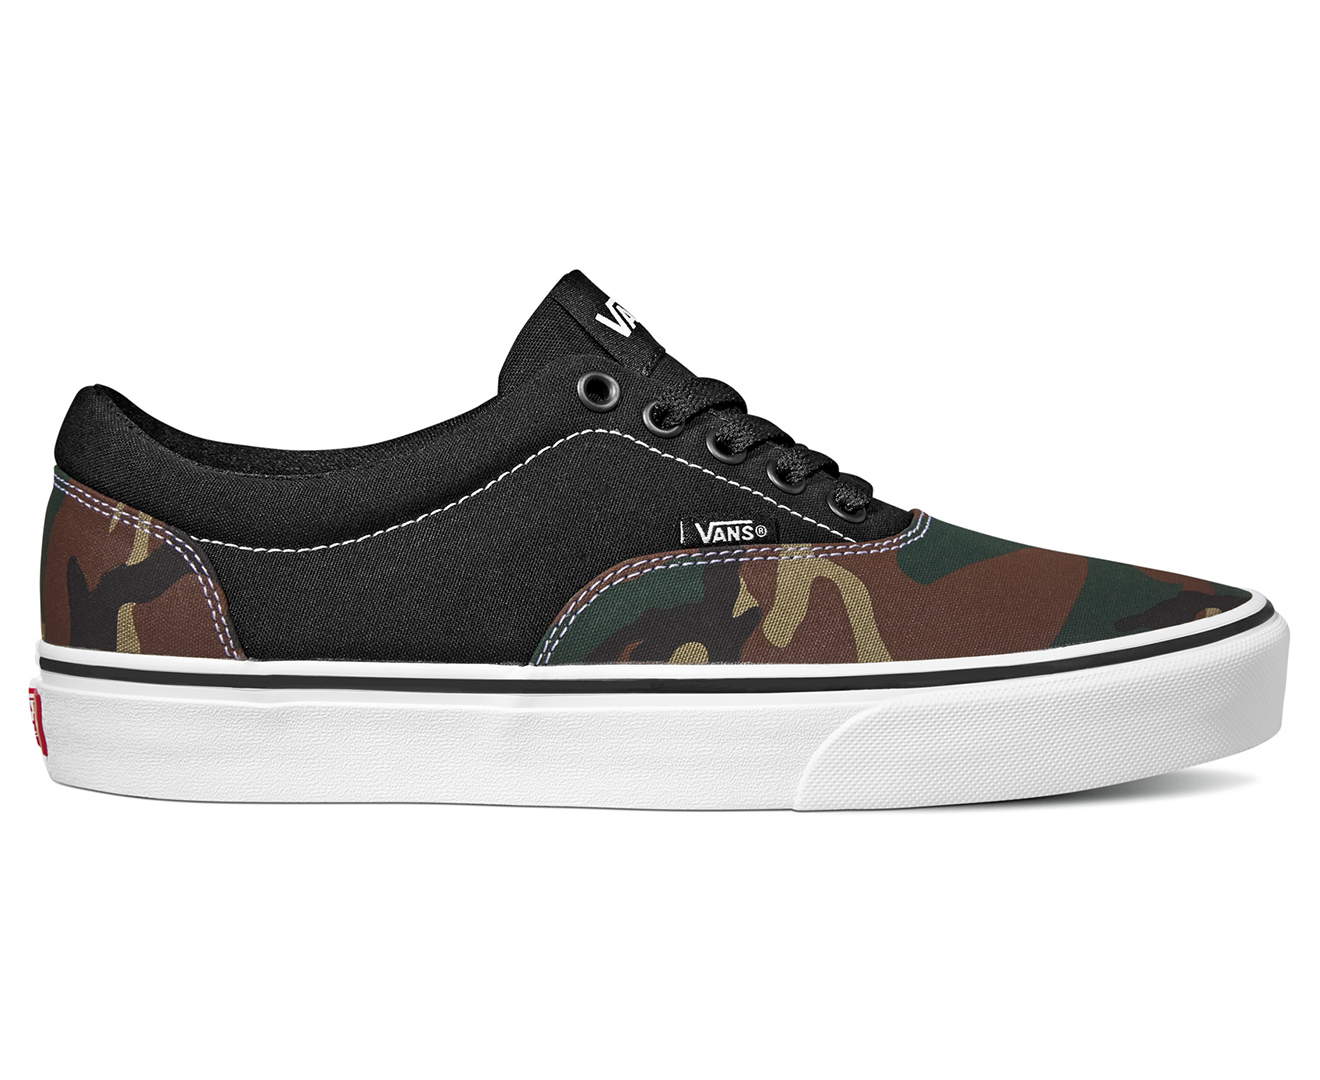 Vans Unisex Doheny Sneakers - Mixed Camo/Black/White | Catch.co.nz